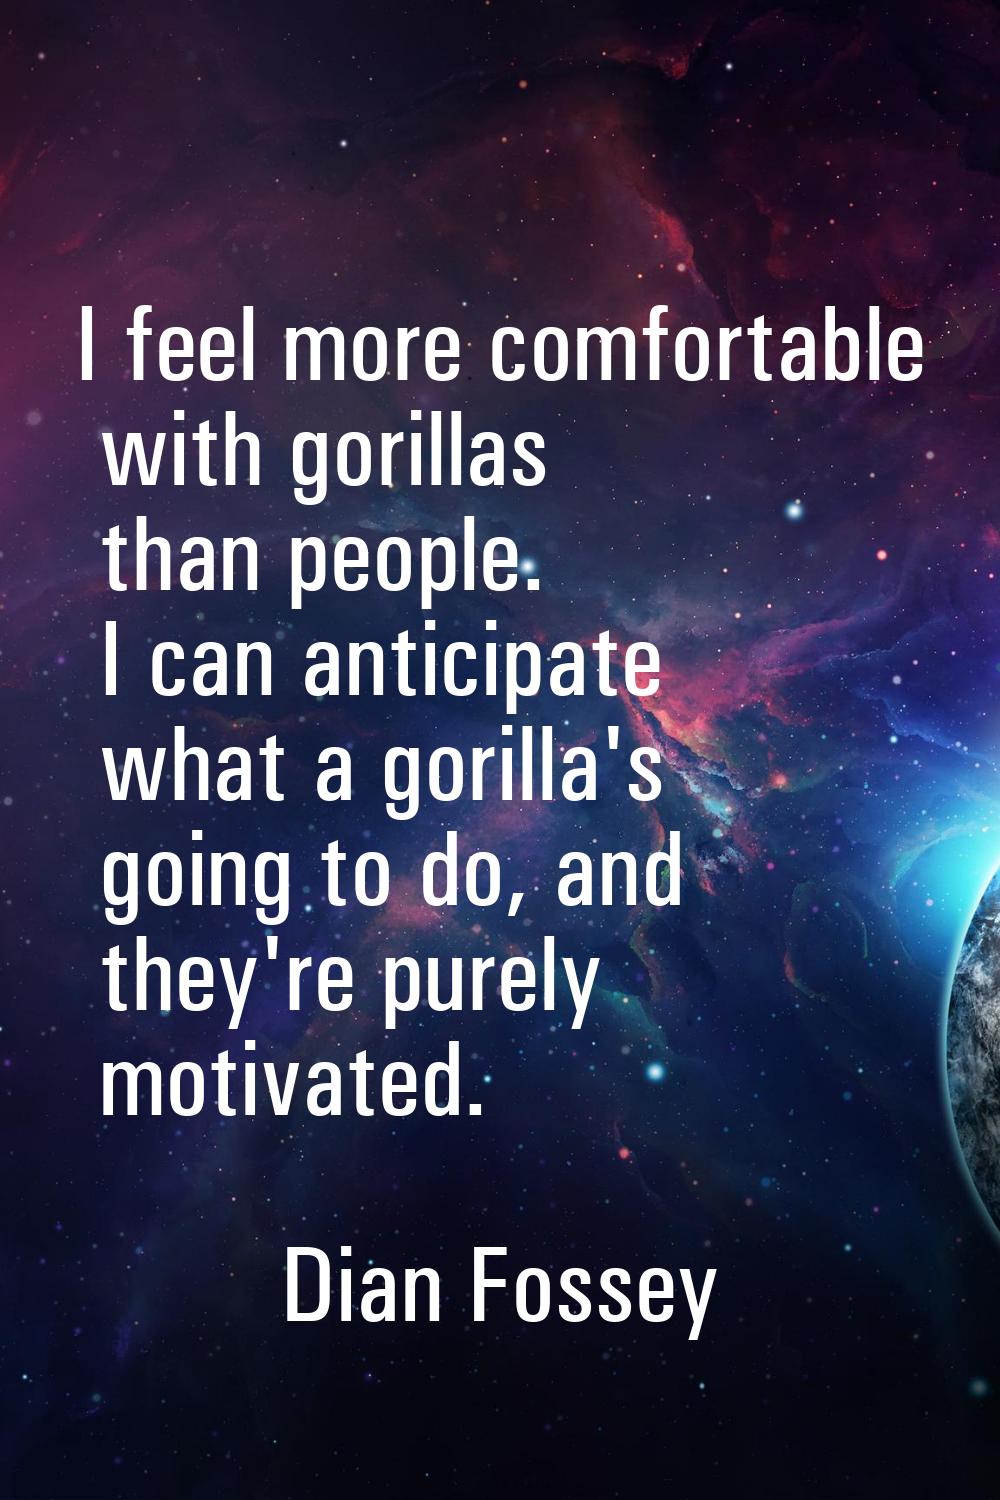 I feel more comfortable with gorillas than people. I can anticipate what a gorilla's going to do, a